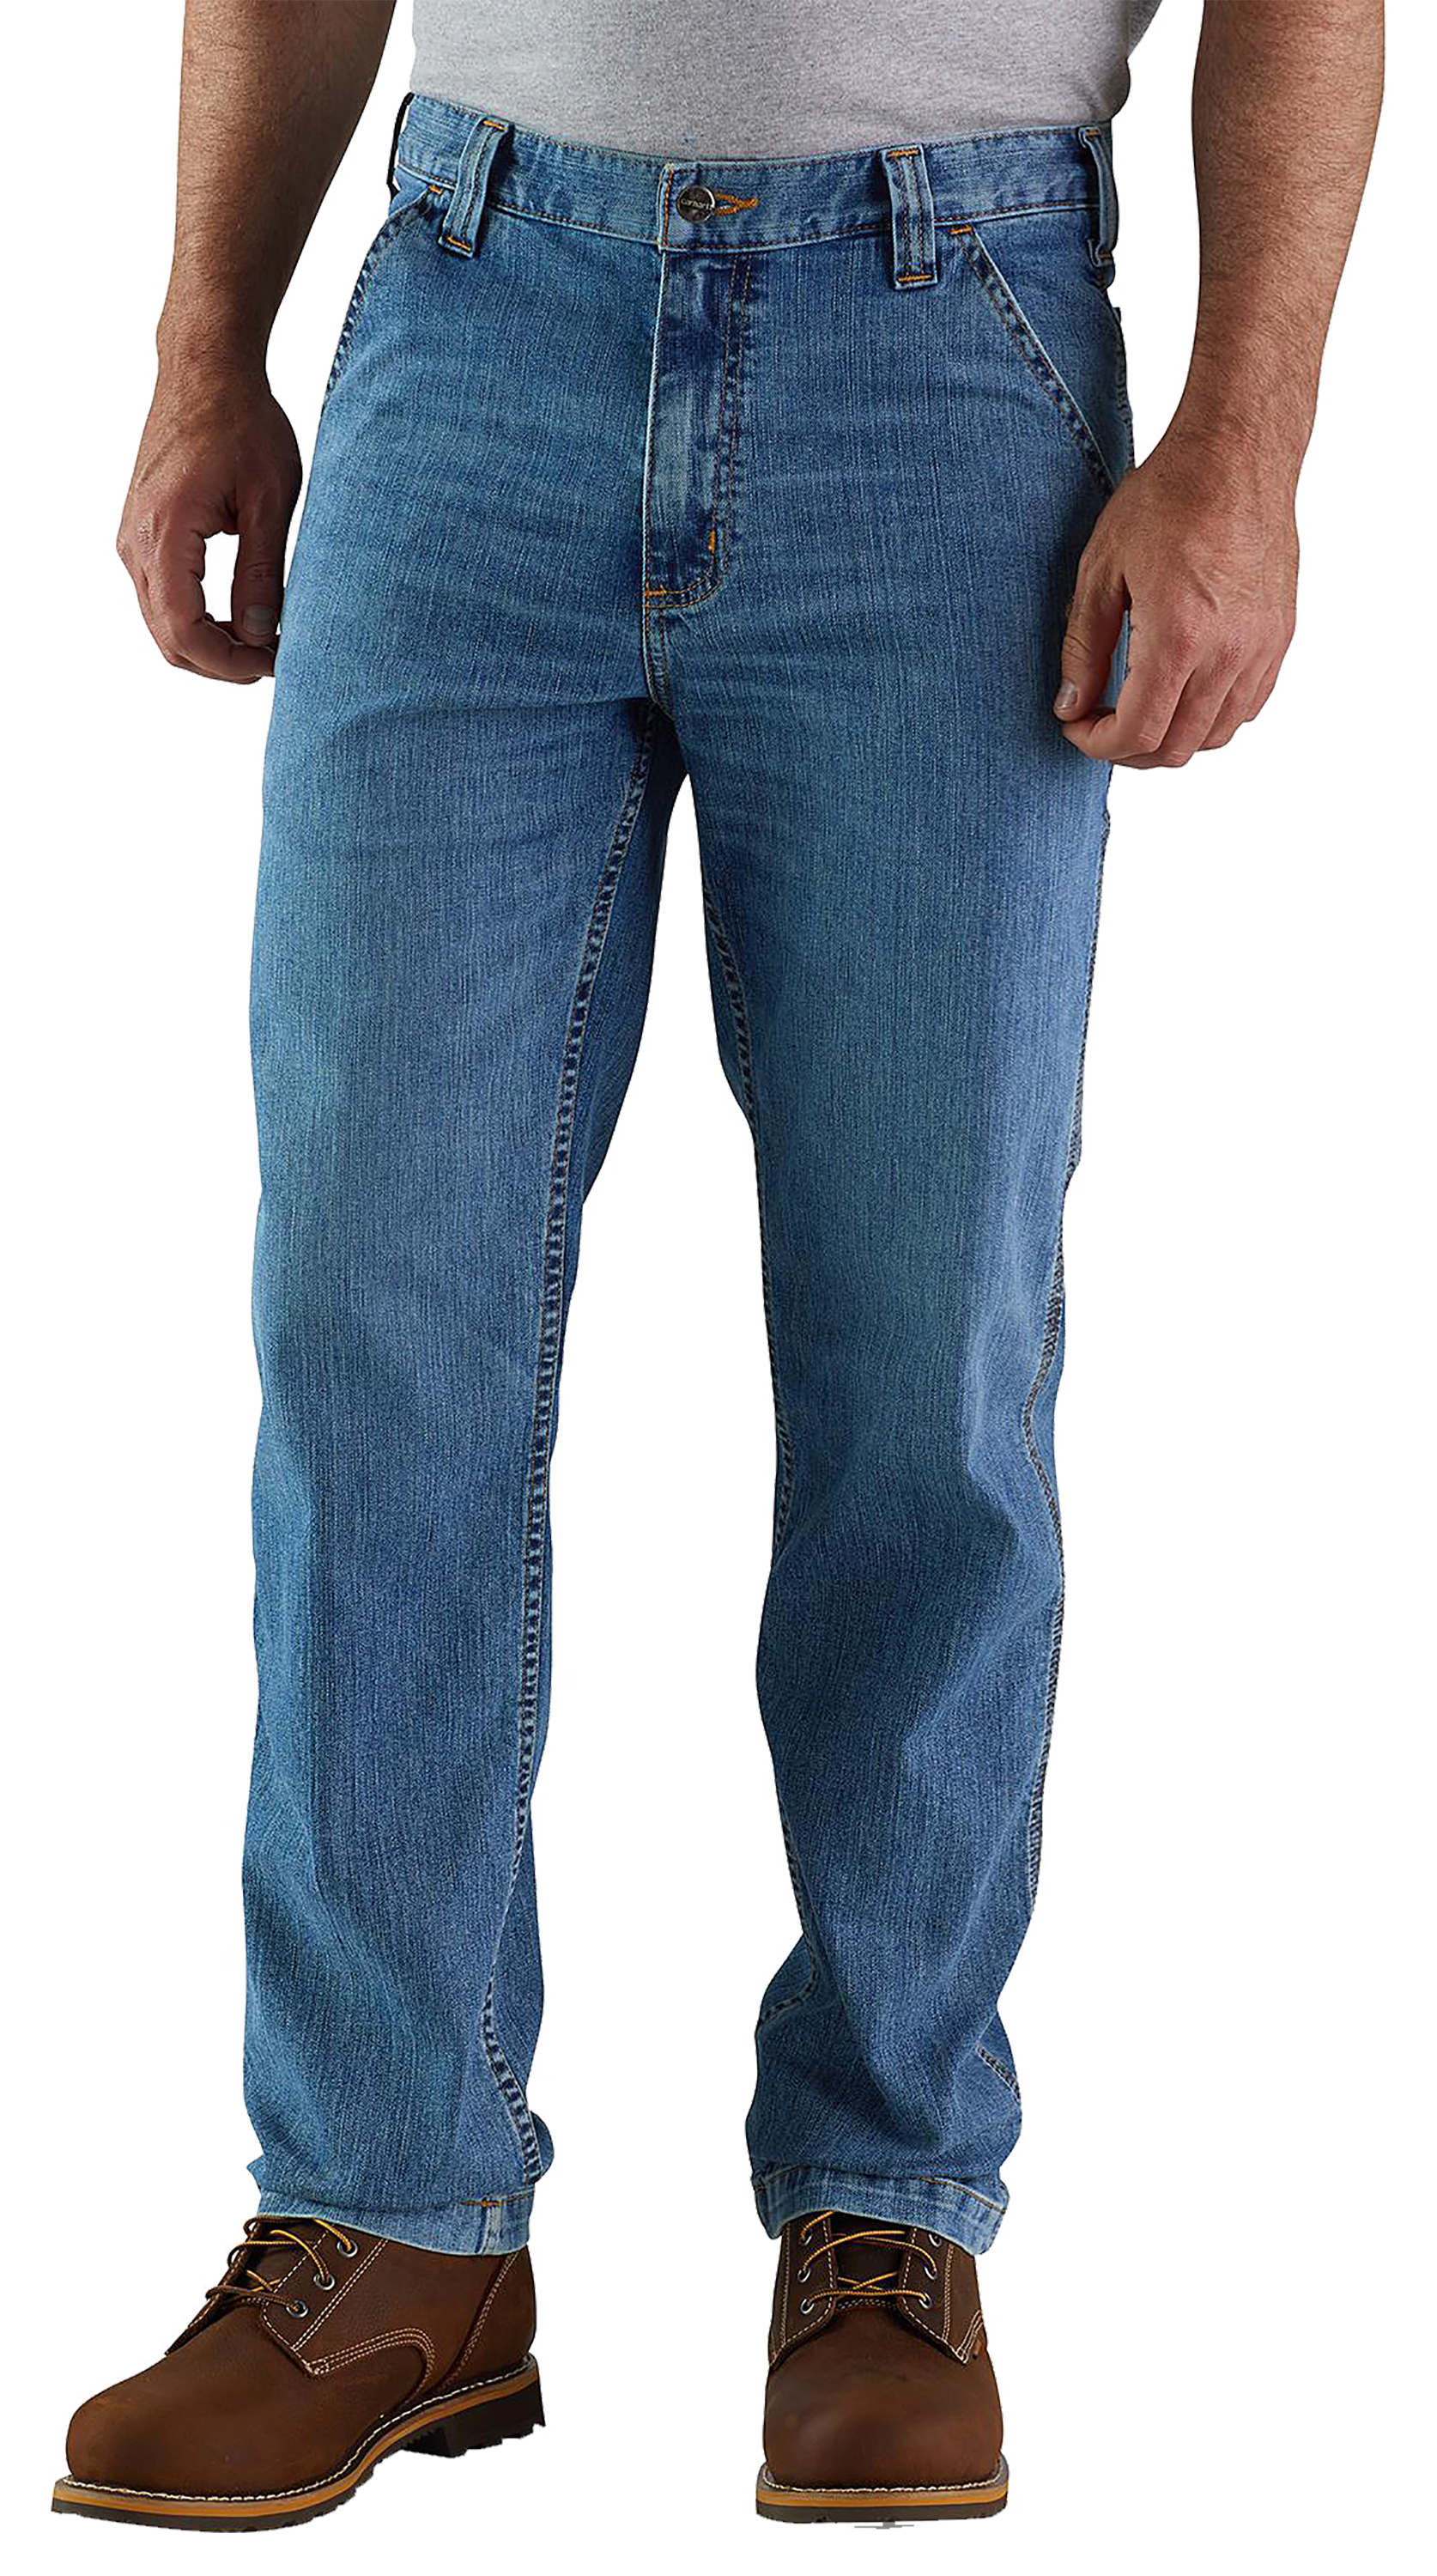 Men's Rugged Flex Relaxed Fit Utility Jean - Houghton